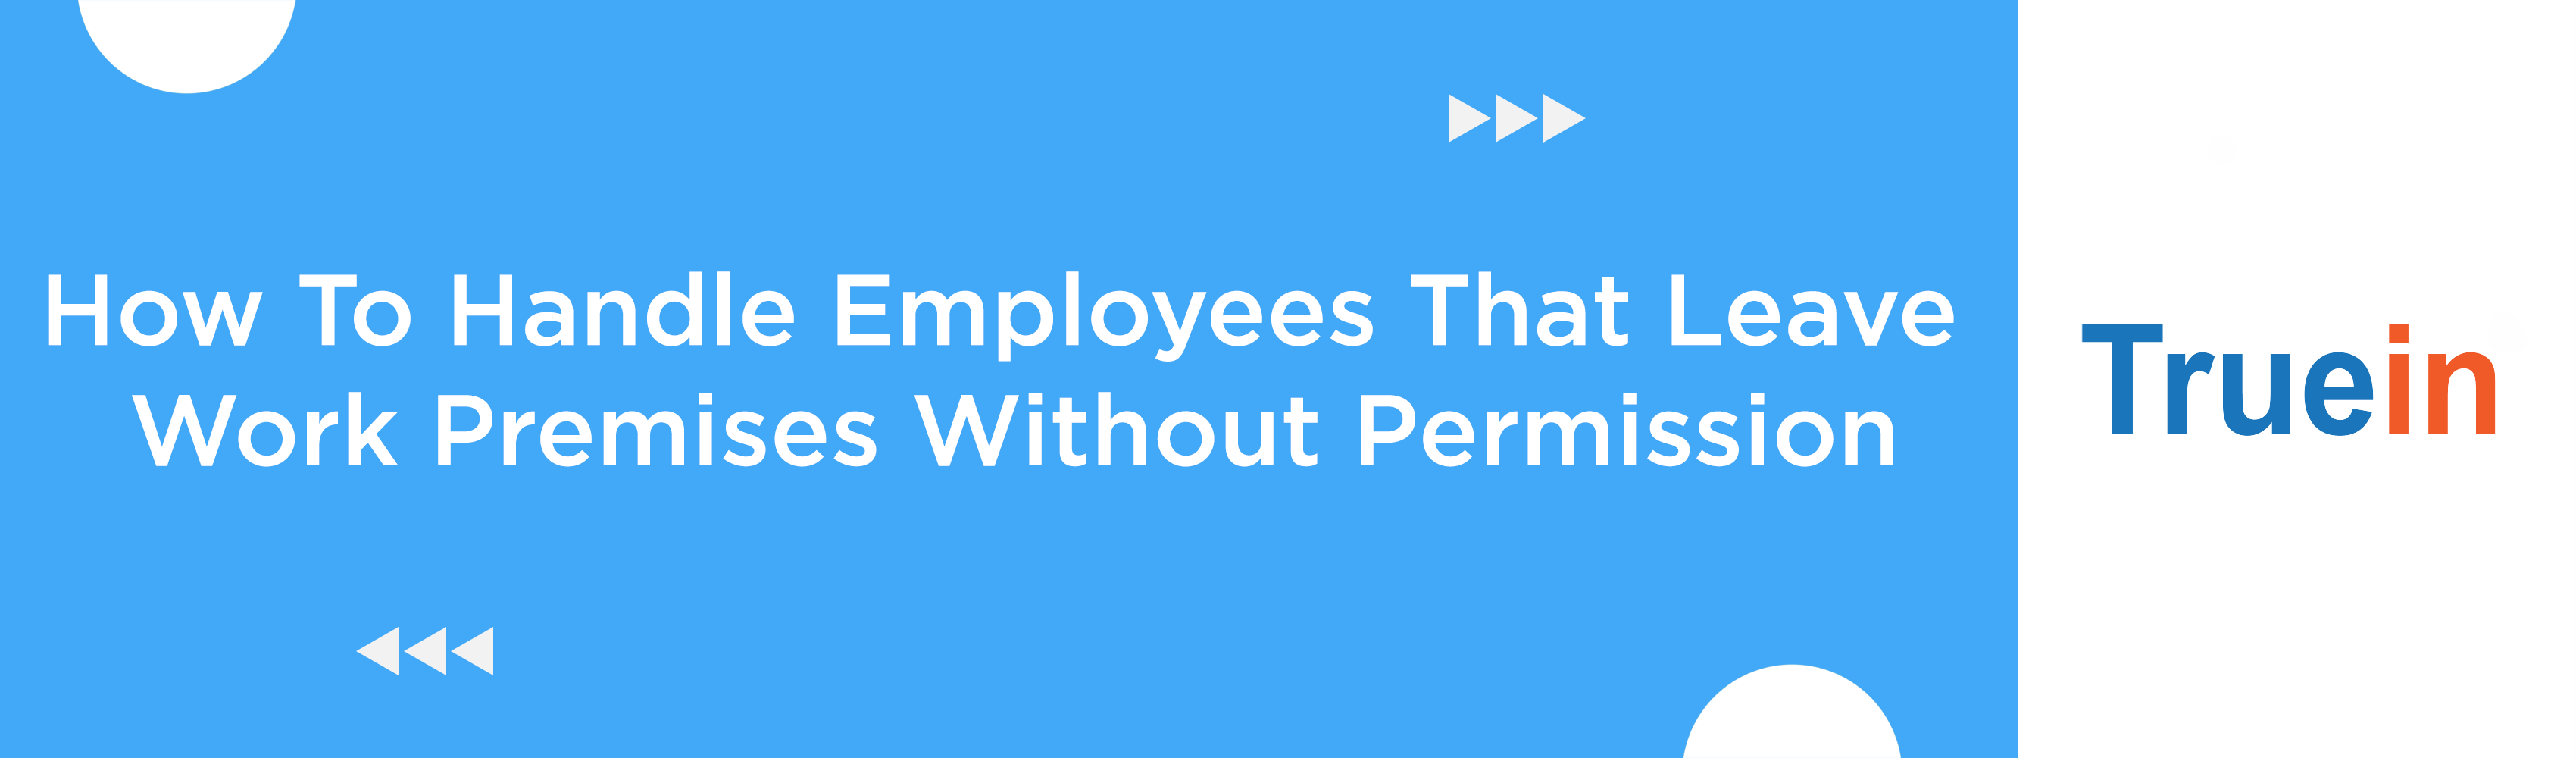 How To Handle Employees That Leave Work Premises Without Permission